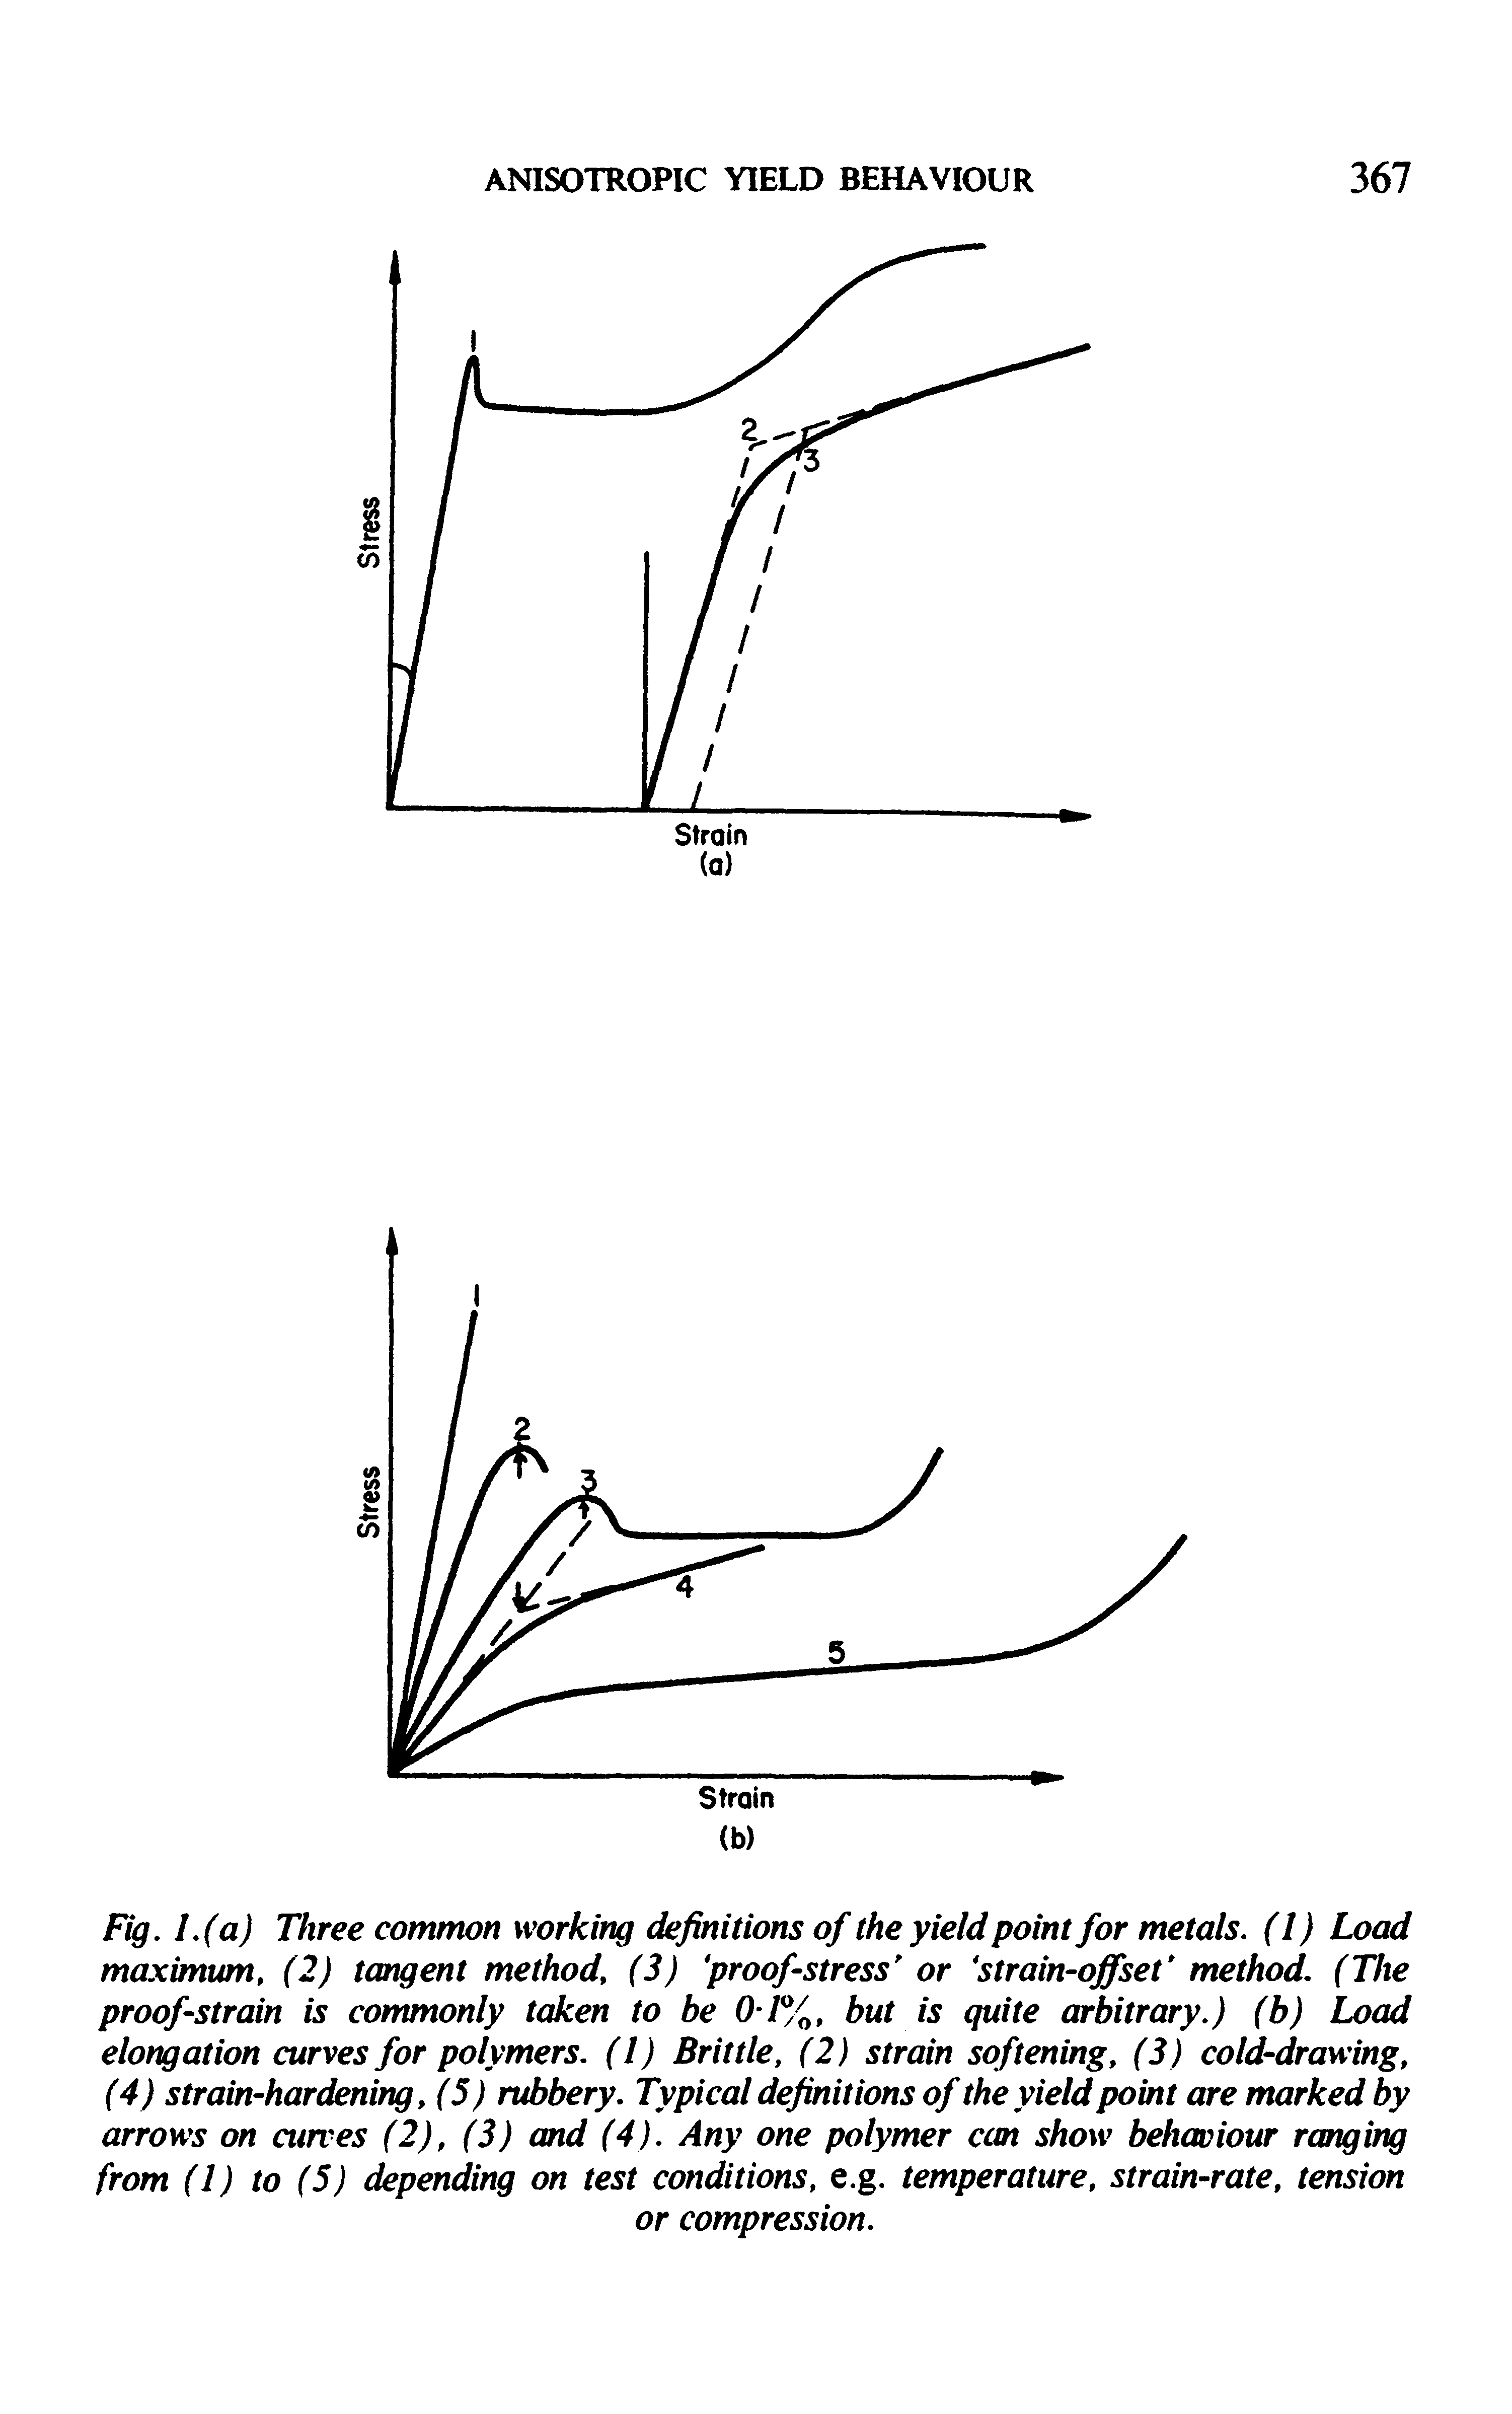 Fig. L(a) Three common working definitions of the yield point for metals. (1) Load maximum (2) tangent method, (3) firoofistress" or "strain-offset method. (The proof-strain is commonly taken to be 0 /%, but is quite arbitrary.) (b) Load elongation curves for polymers. (I) Brittle, (2) strain softening, (3) cold-drawing, (4) strain-hardening, (5) rubbery. Typical definitions of the yield point are marked by arrows on curves (2), (3) and (4). Any one polymer can show behaviour raiding from (1) to (5) depending on test conditions, e.g. temperature, strain-rate, tension...